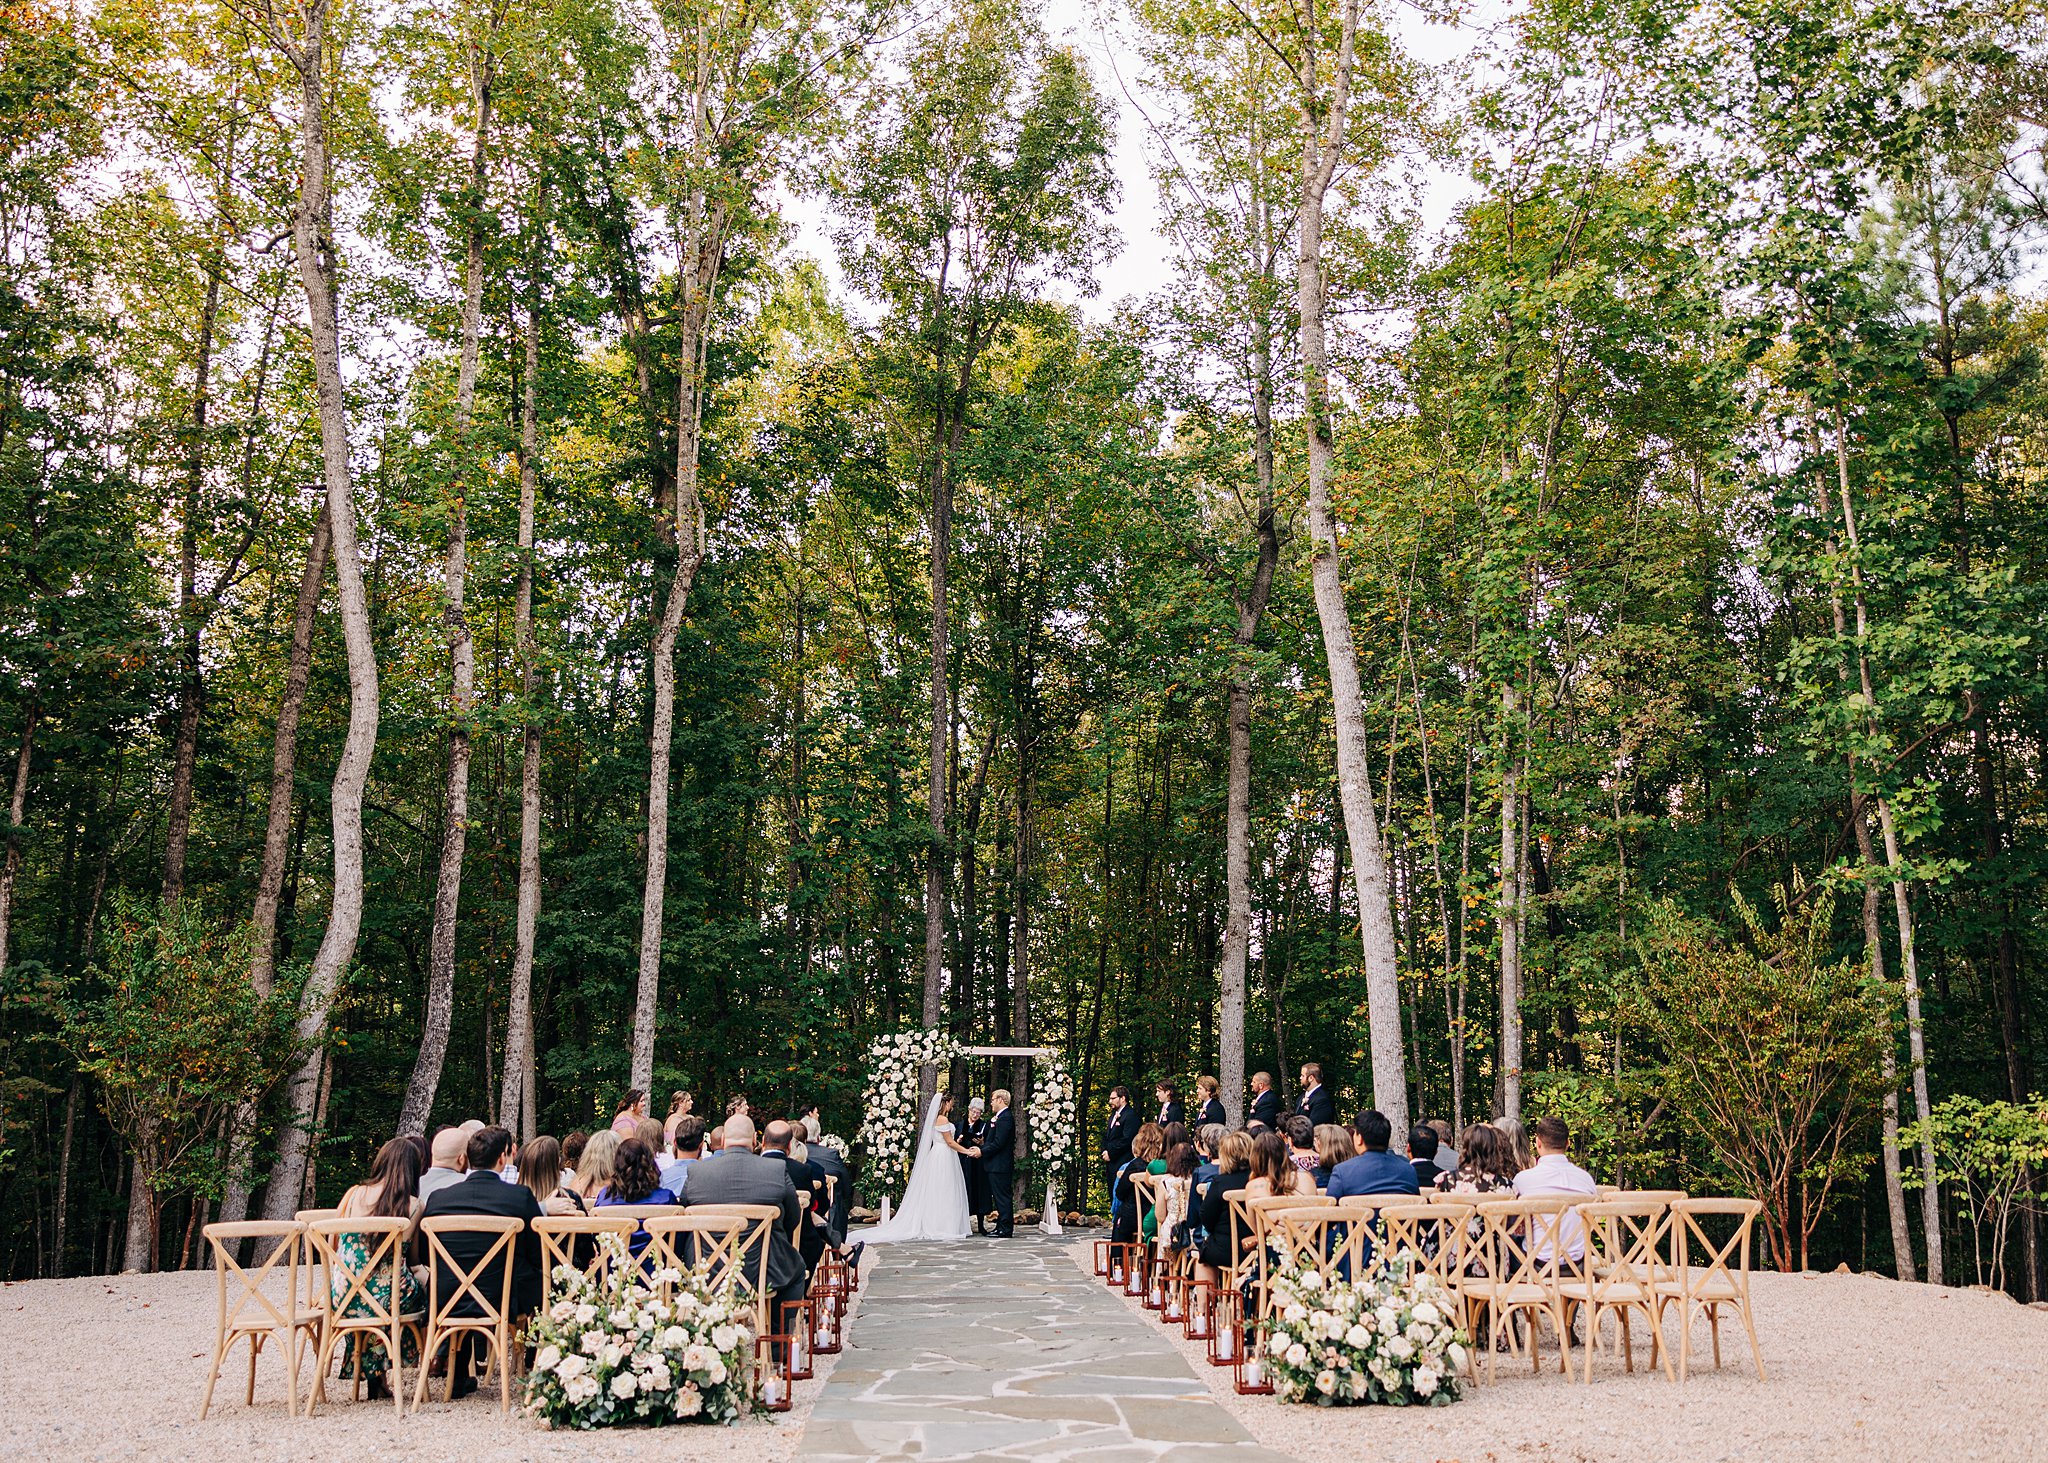 A wide look at an outdoor wedding ceremony in the forest at the carolina grove wedding venue